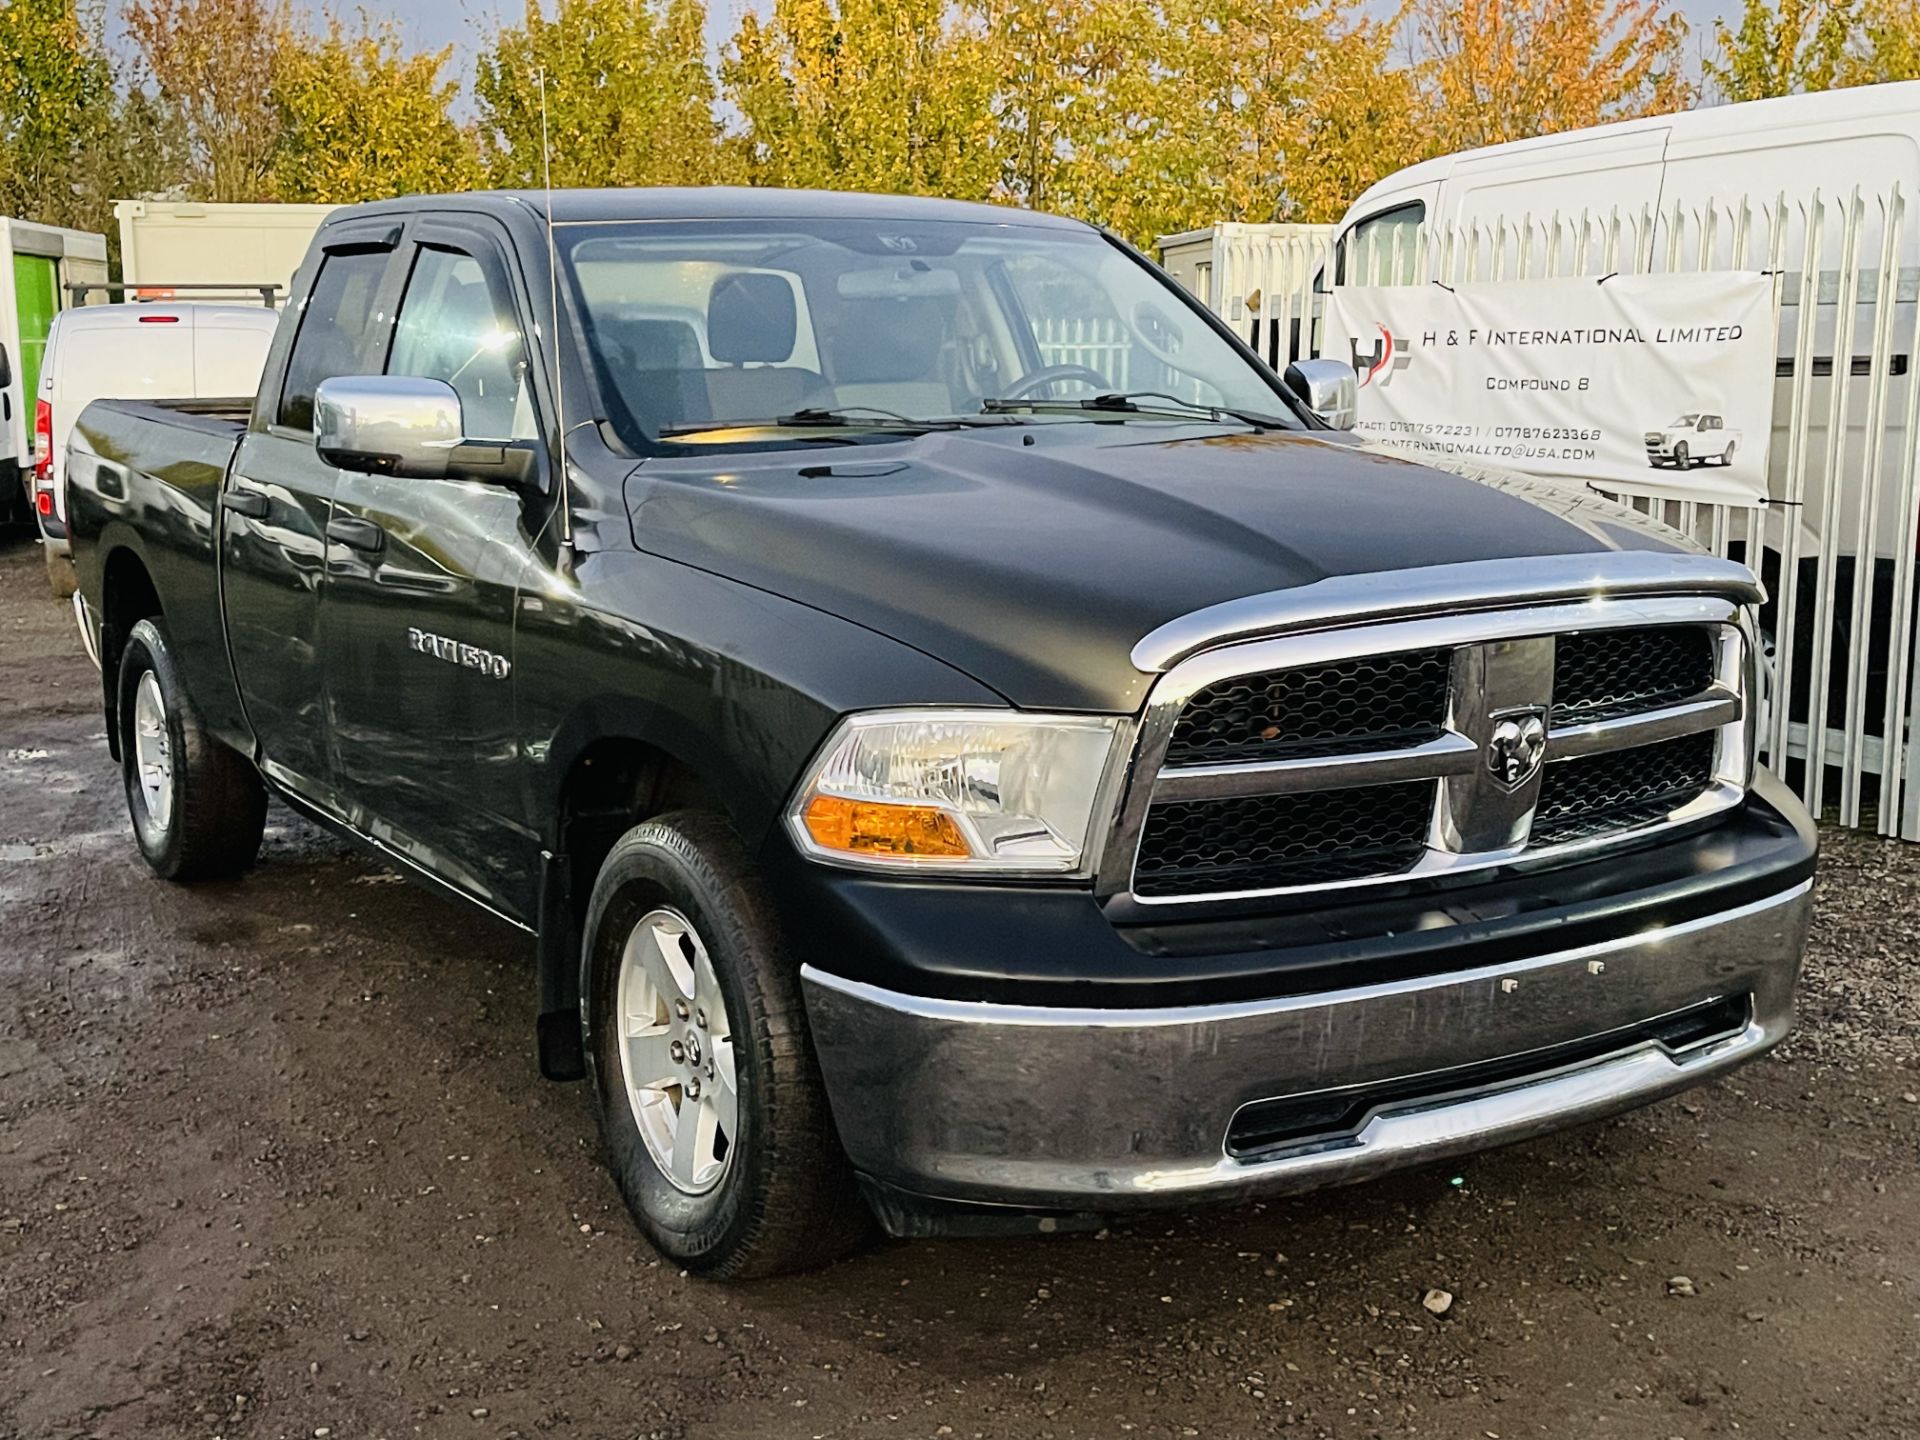 Dodge Ram 4.7 V8 1500 ST 4WD ' 2012 Year ' A/C - Cruise Control - 6 Seats - Chrome Pack - Image 4 of 27